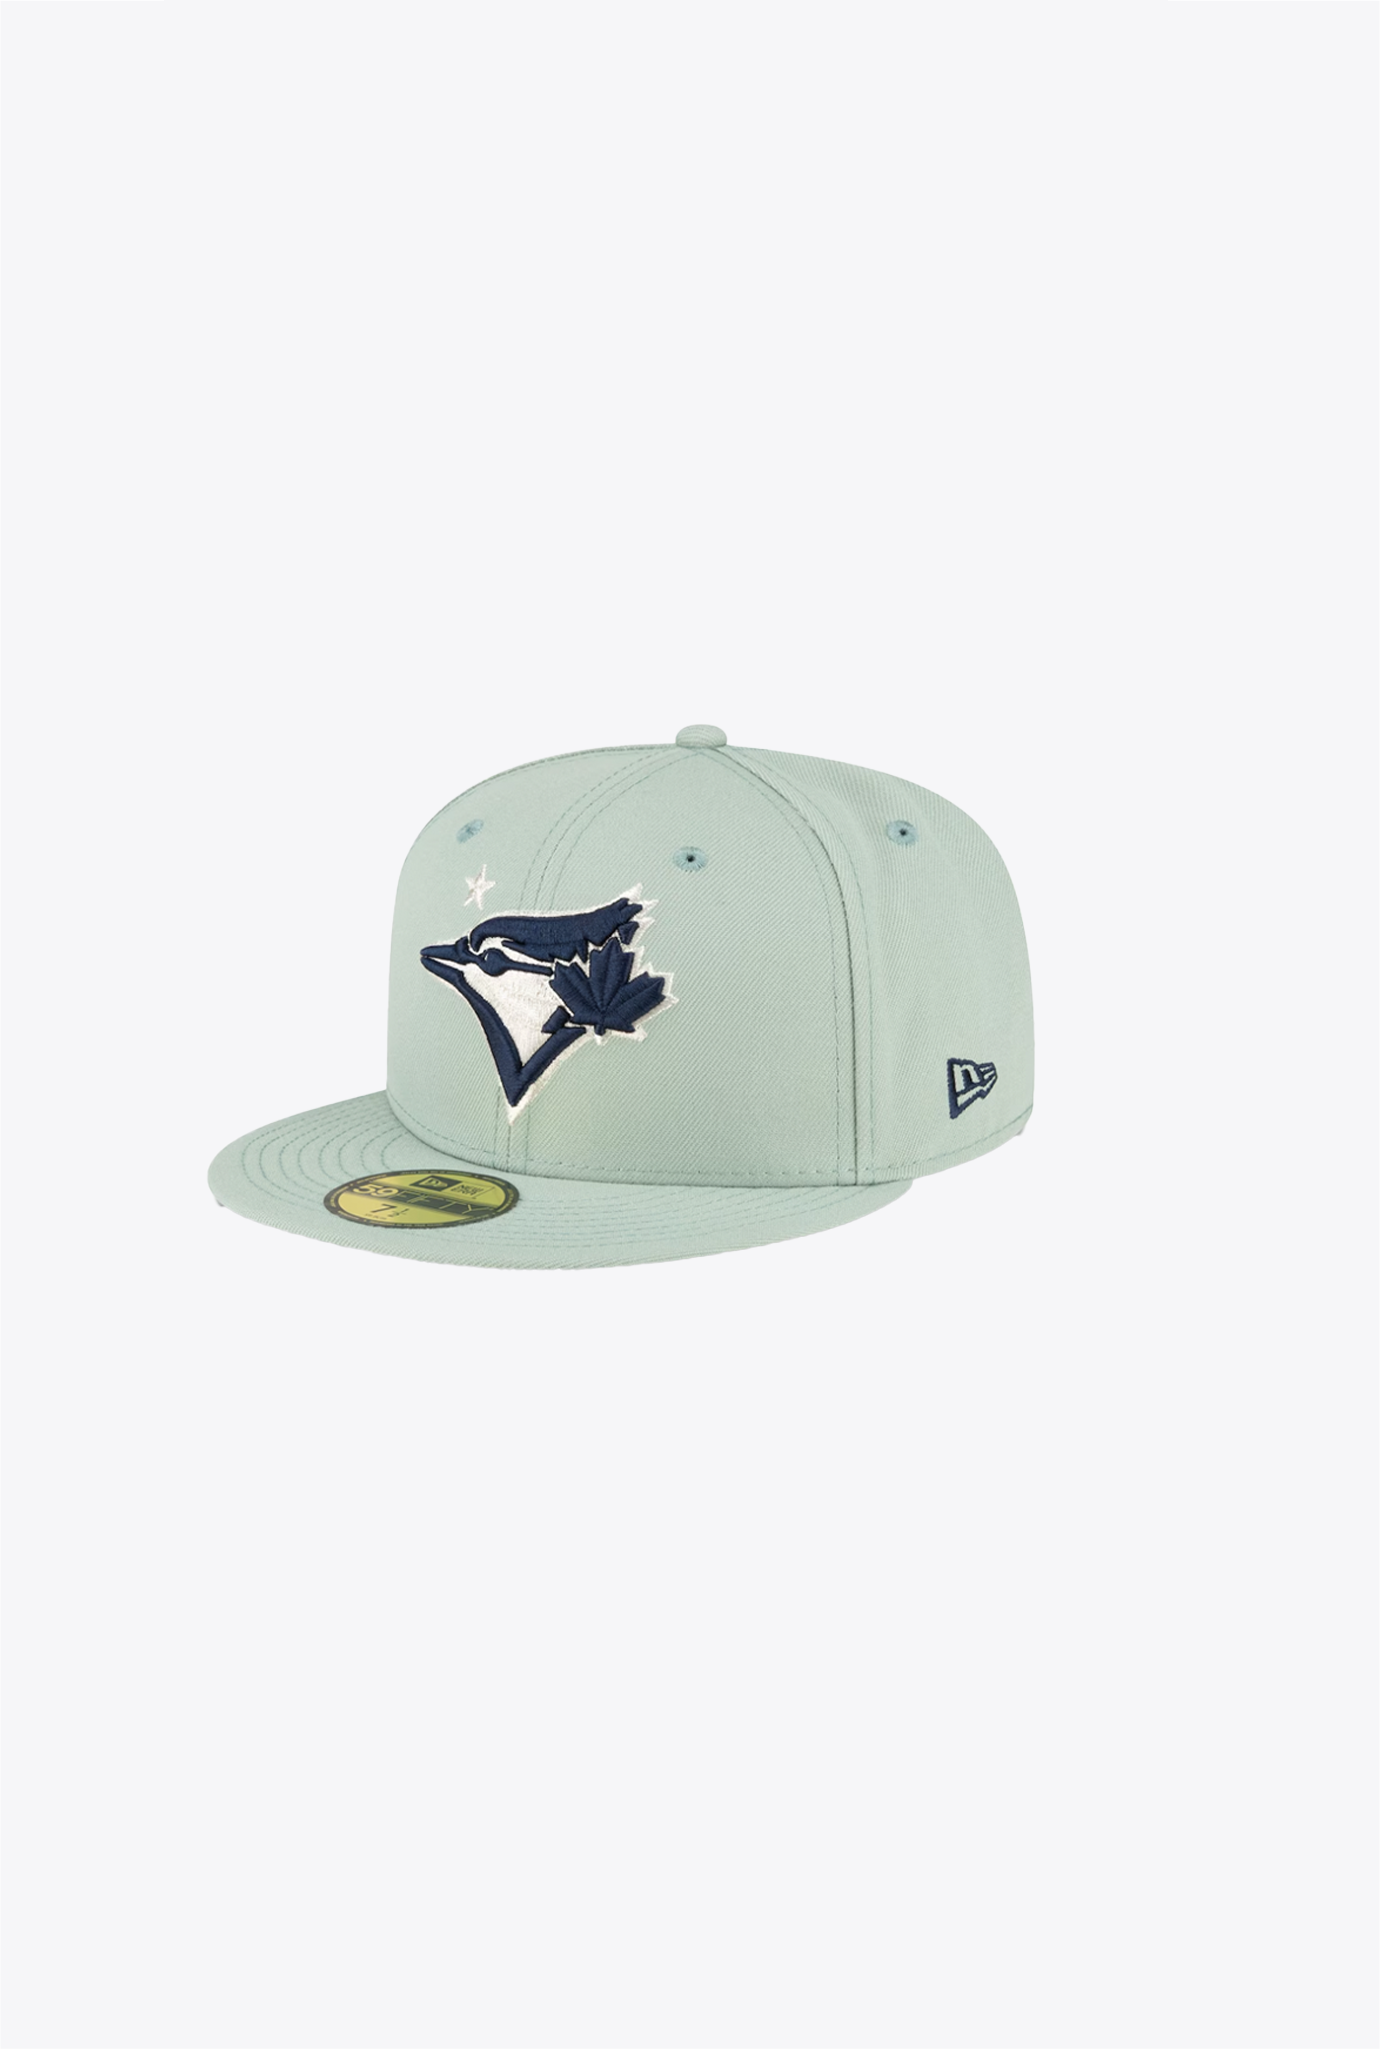 Toronto Blue Jays All-Star Game 2023 59FIFTY - Mint